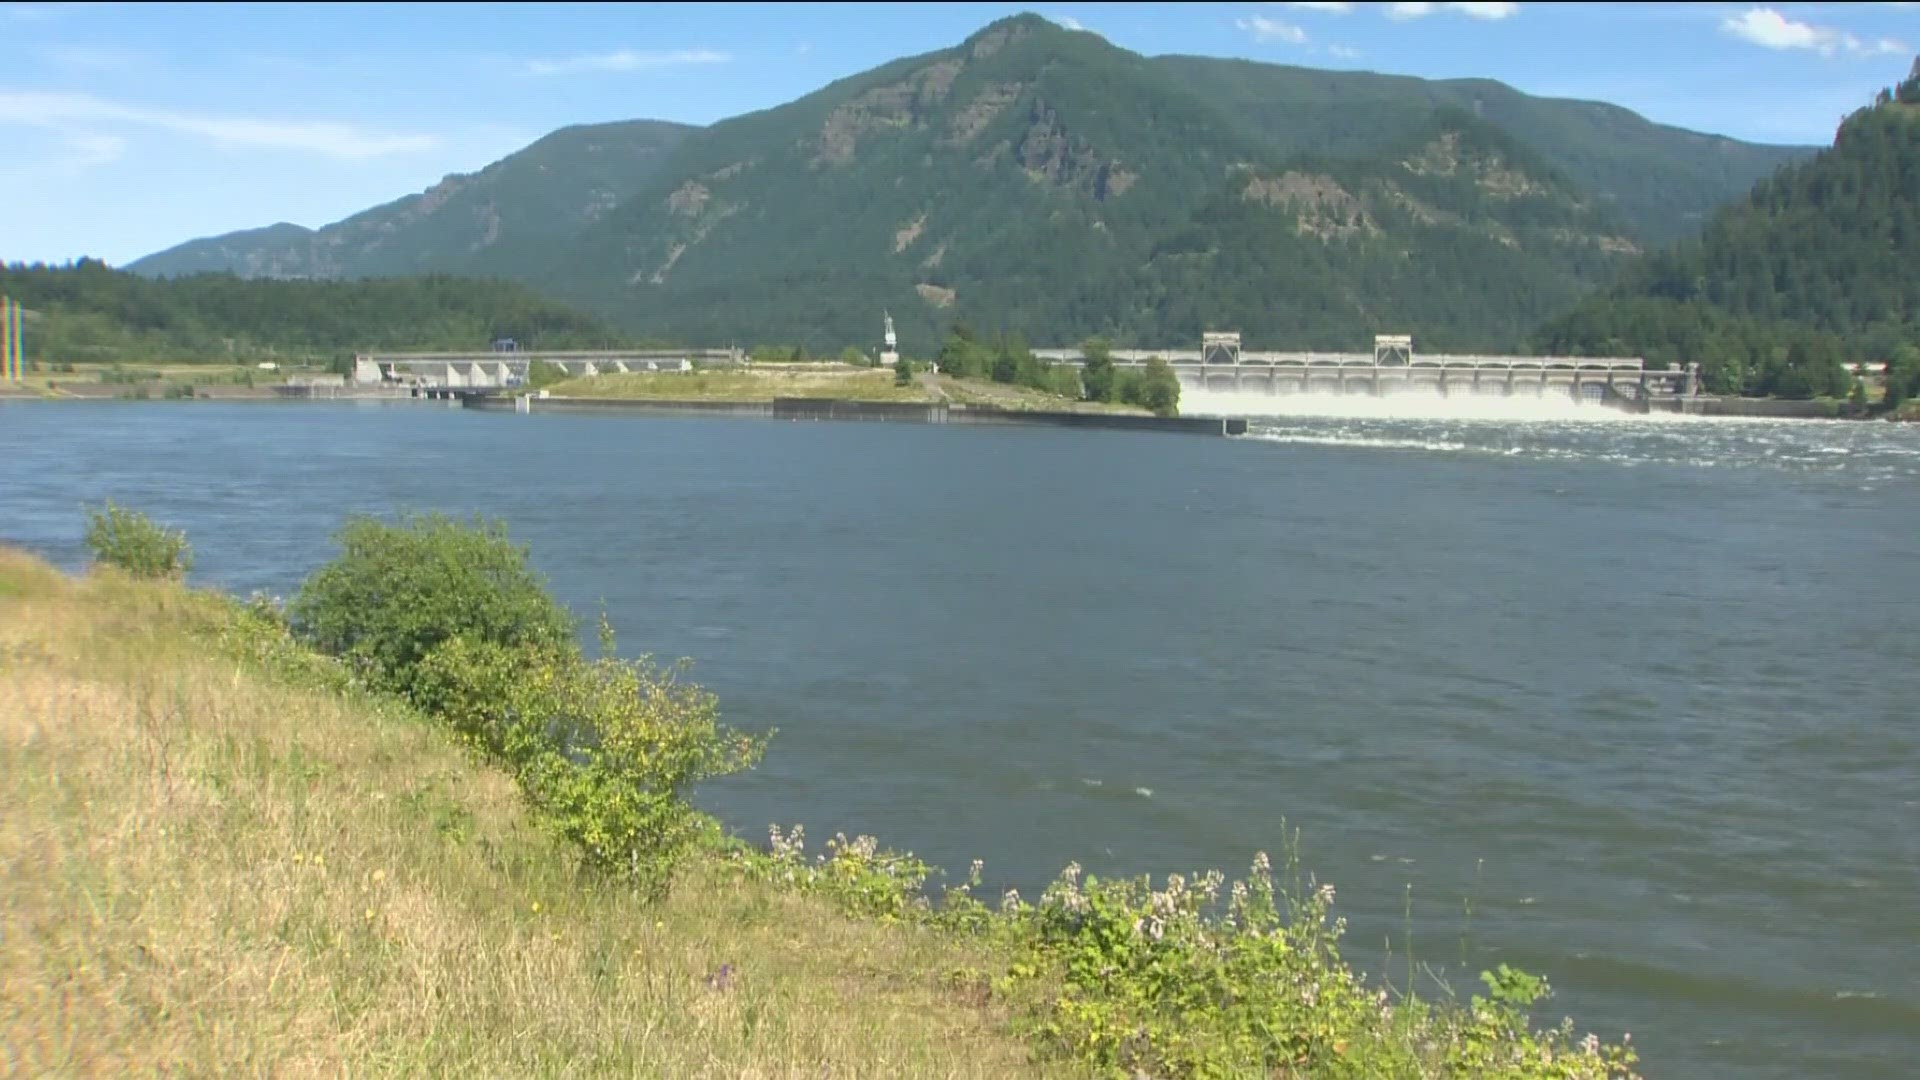 Tribes will receive a total of $208 million over the next 20 years to help reintroduce salmon to blocked habitats in the upper areas of the Columbia River.